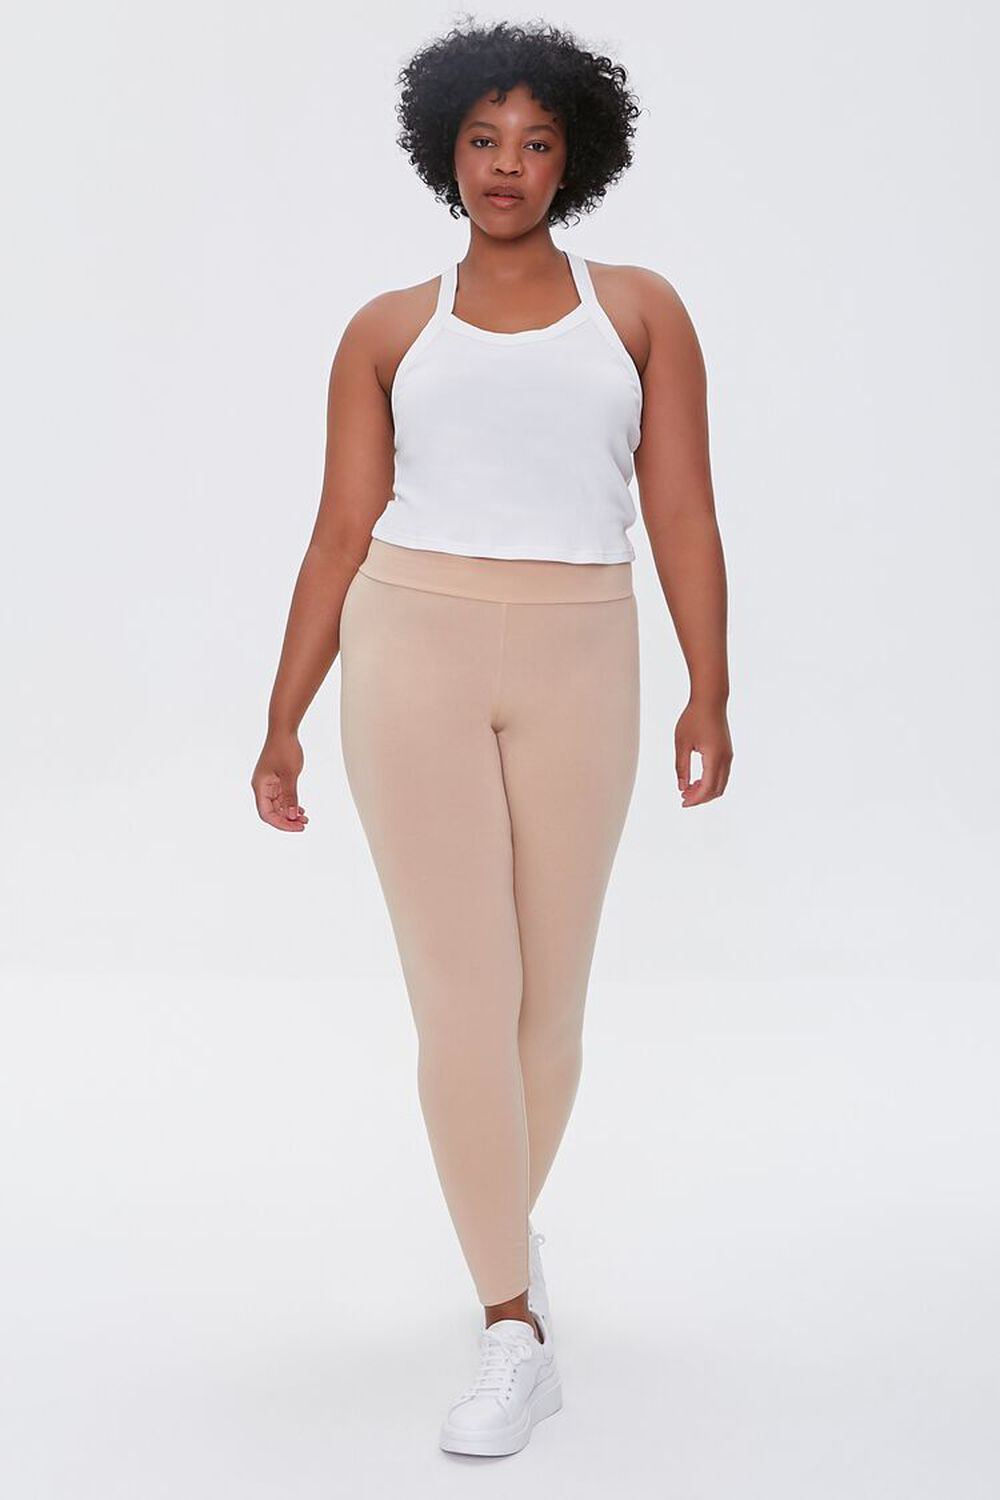 Buy NIA Ankle Length Premium Cotton Leggings for Women and Girls, Sizes:  Small Size (S/M) for 26-30 inches Waist, Regular Size (L/XL) for 30-36  inches Waist and Plus Size (2XL/3XL) for 36-40